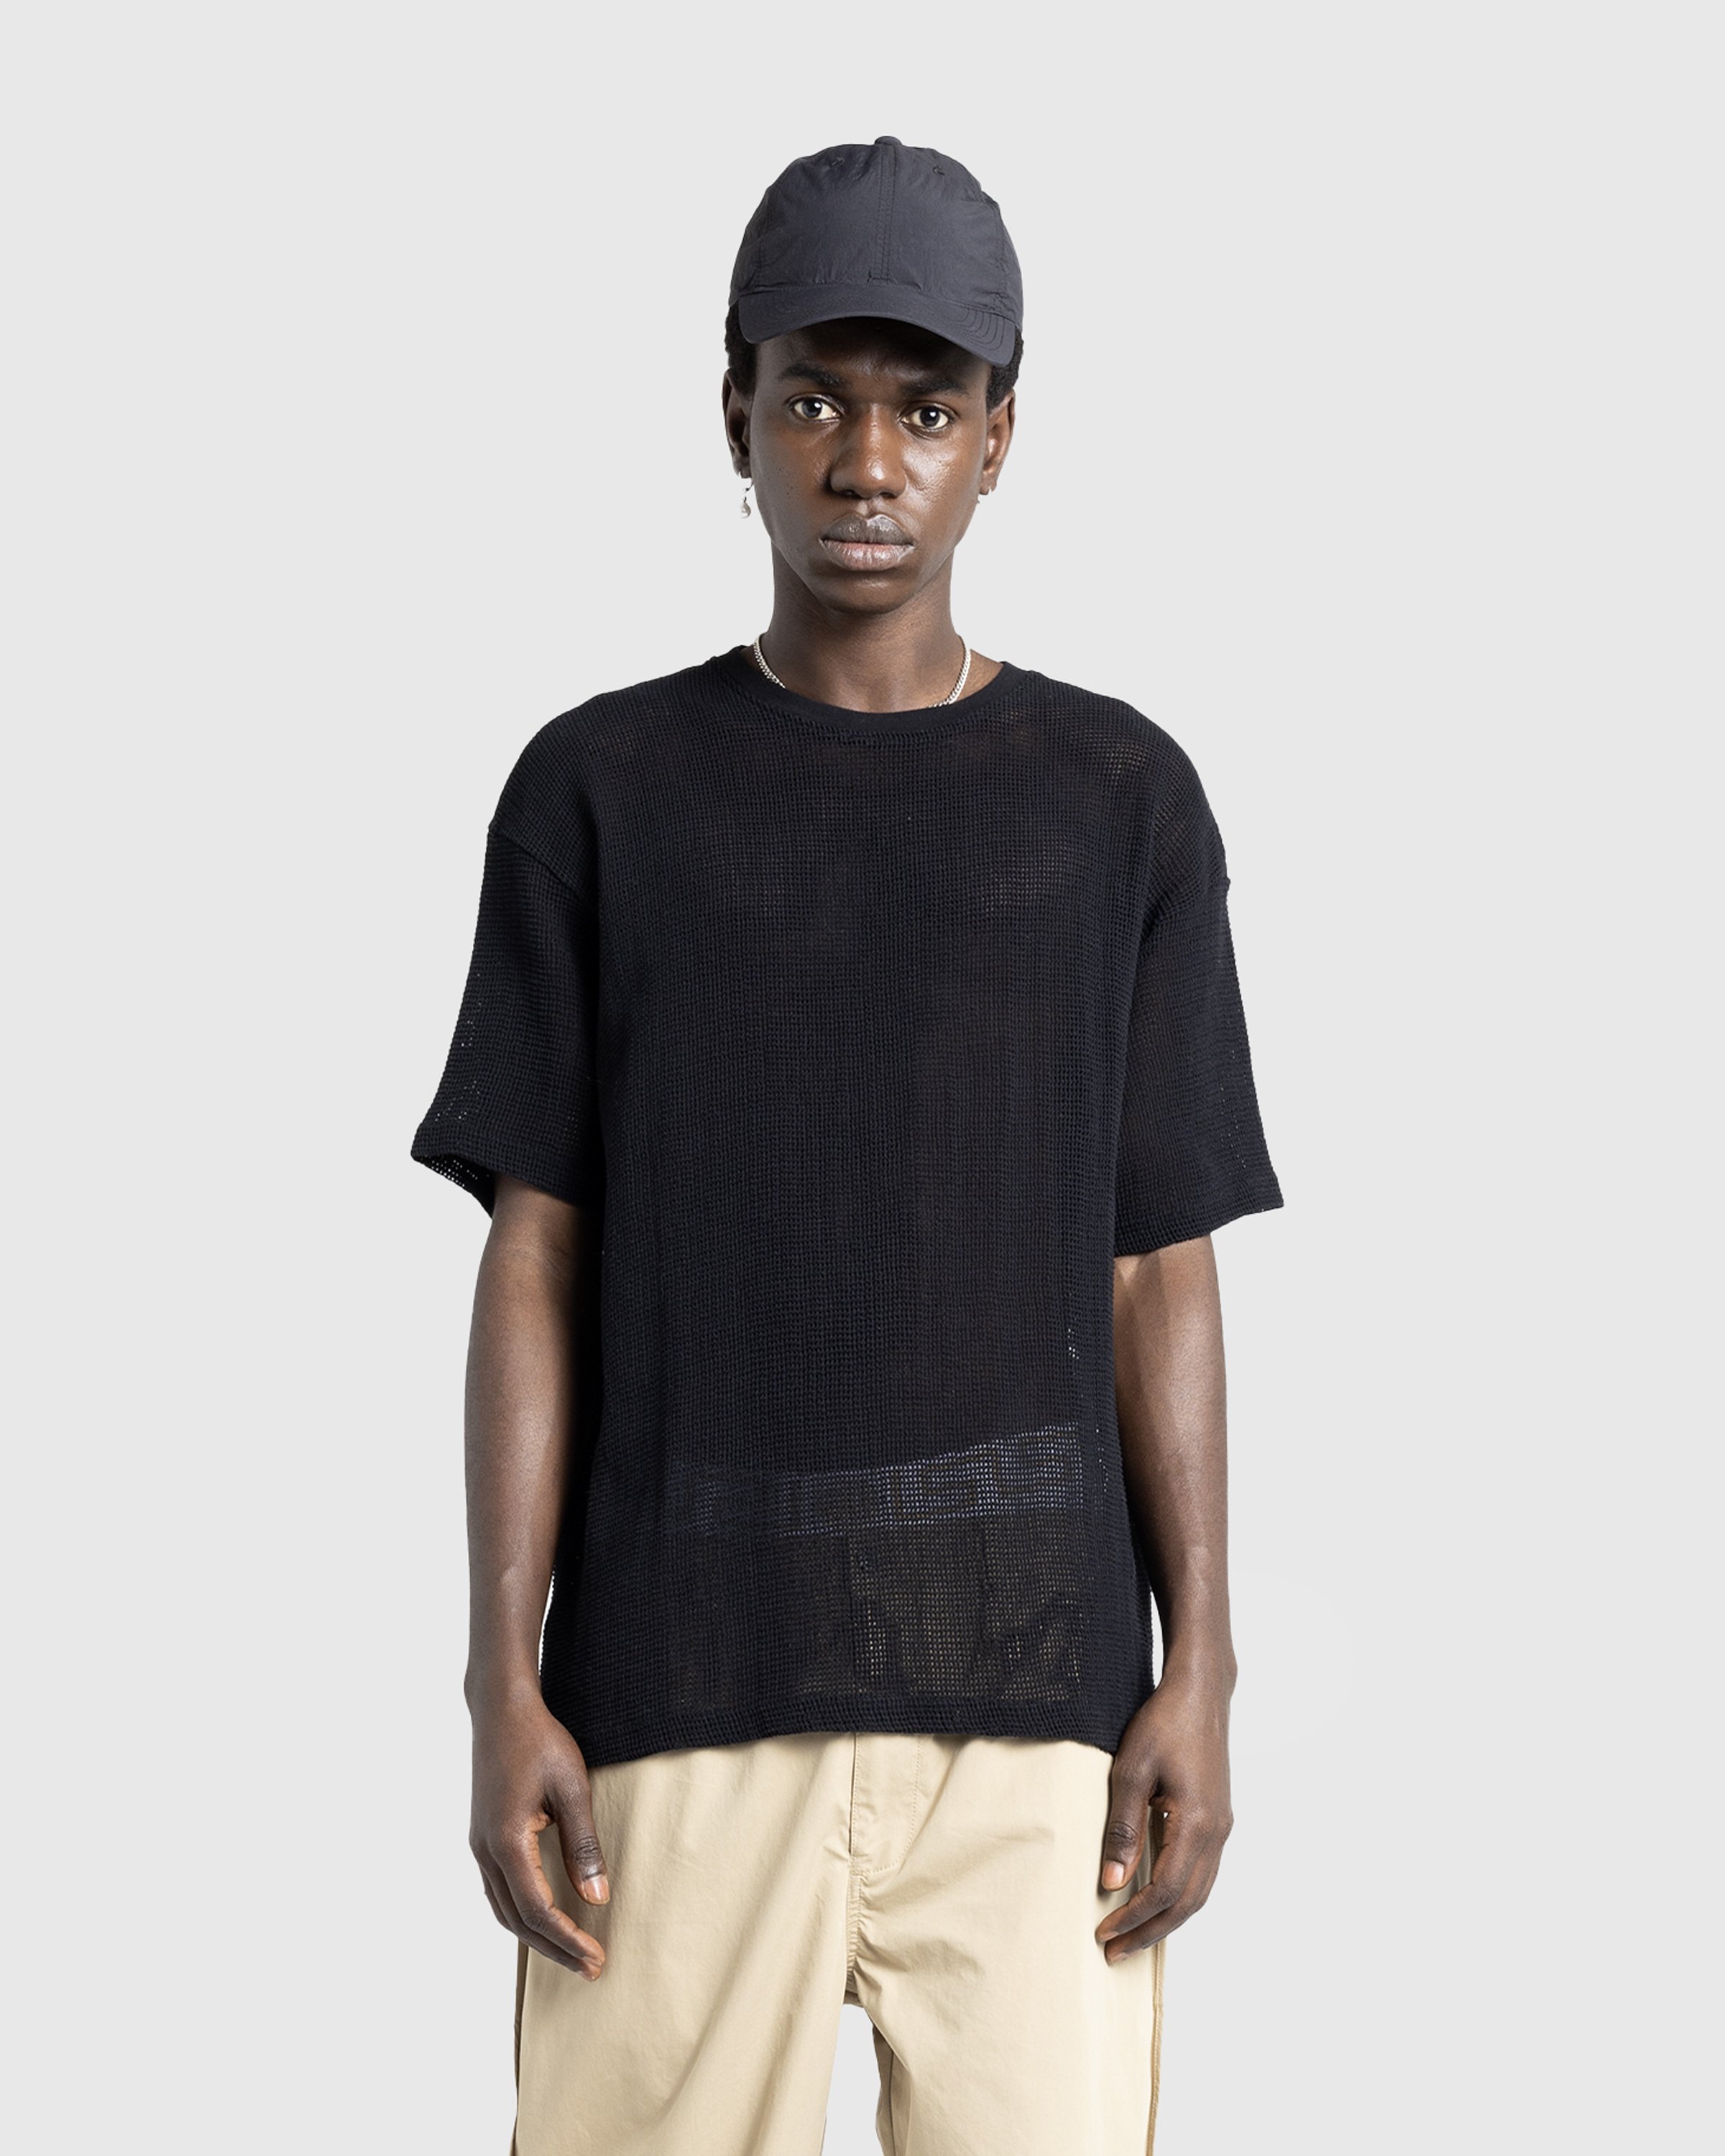 Highsnobiety HS05 - Pigment Dyed Cotton Mesh Knit - Clothing -  - Image 3